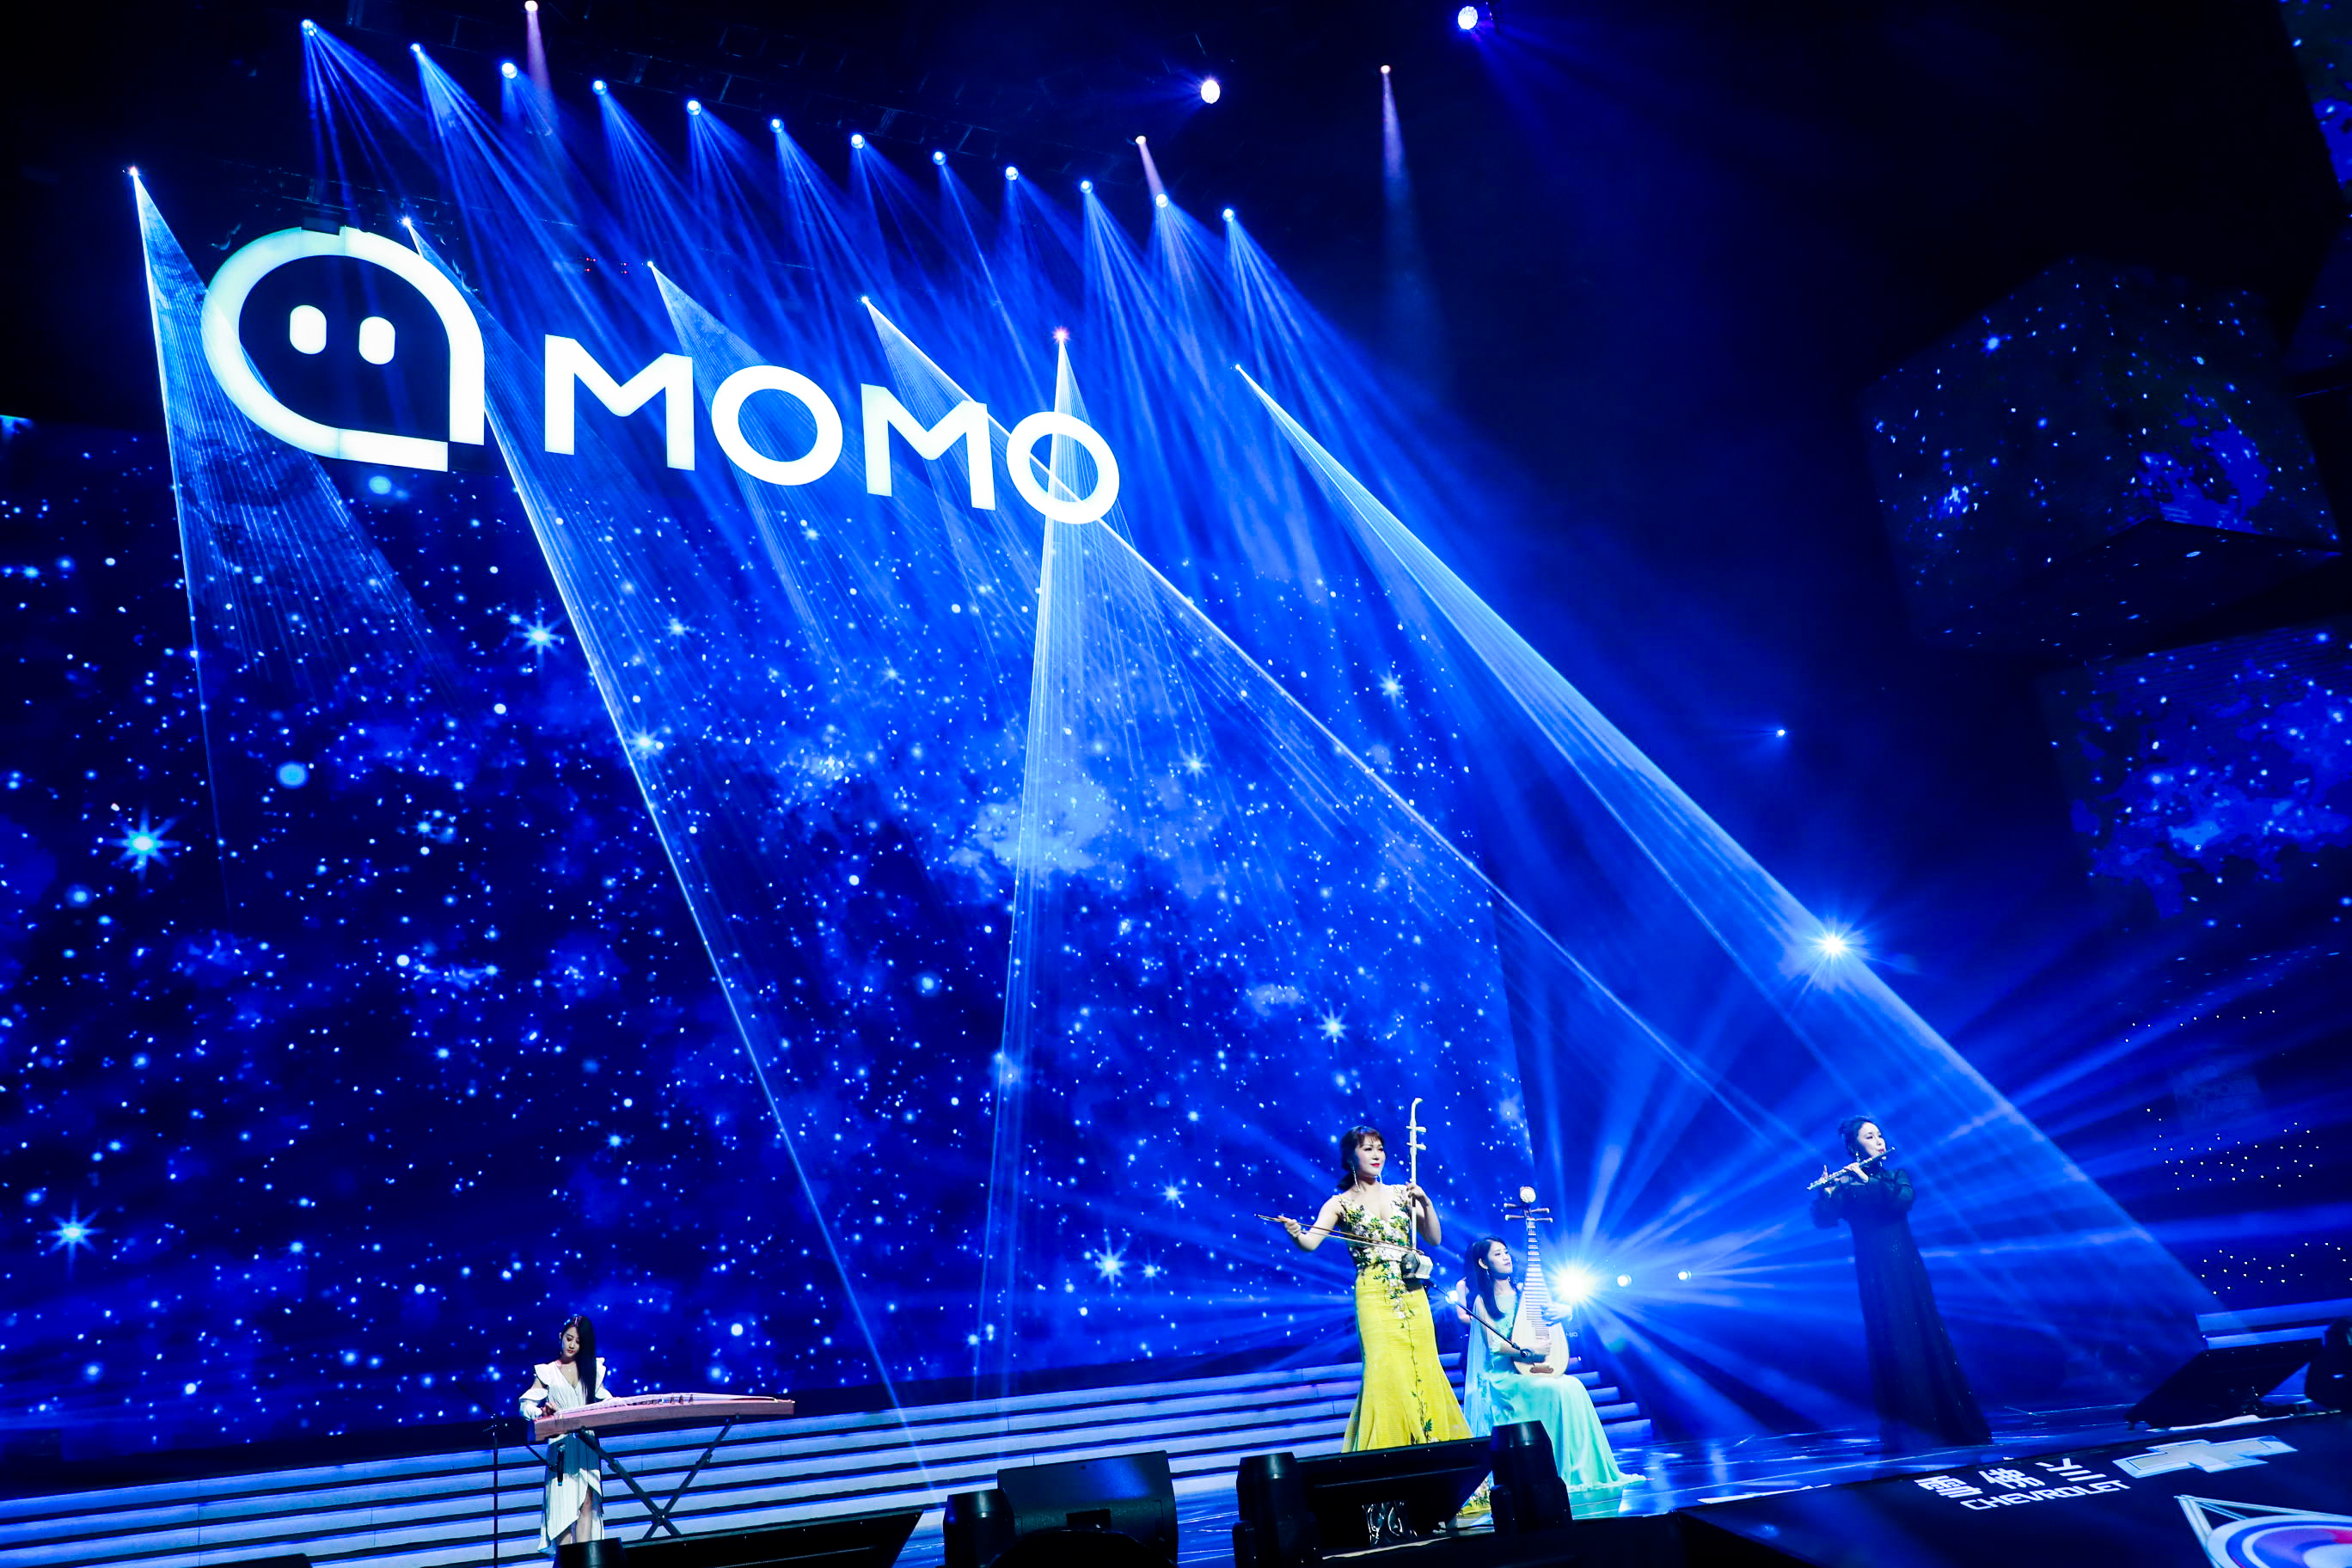 China’s social network platform Momo tops Fortune’s 100 fastest-growing companies, beating Netflix, Amazon and Facebook